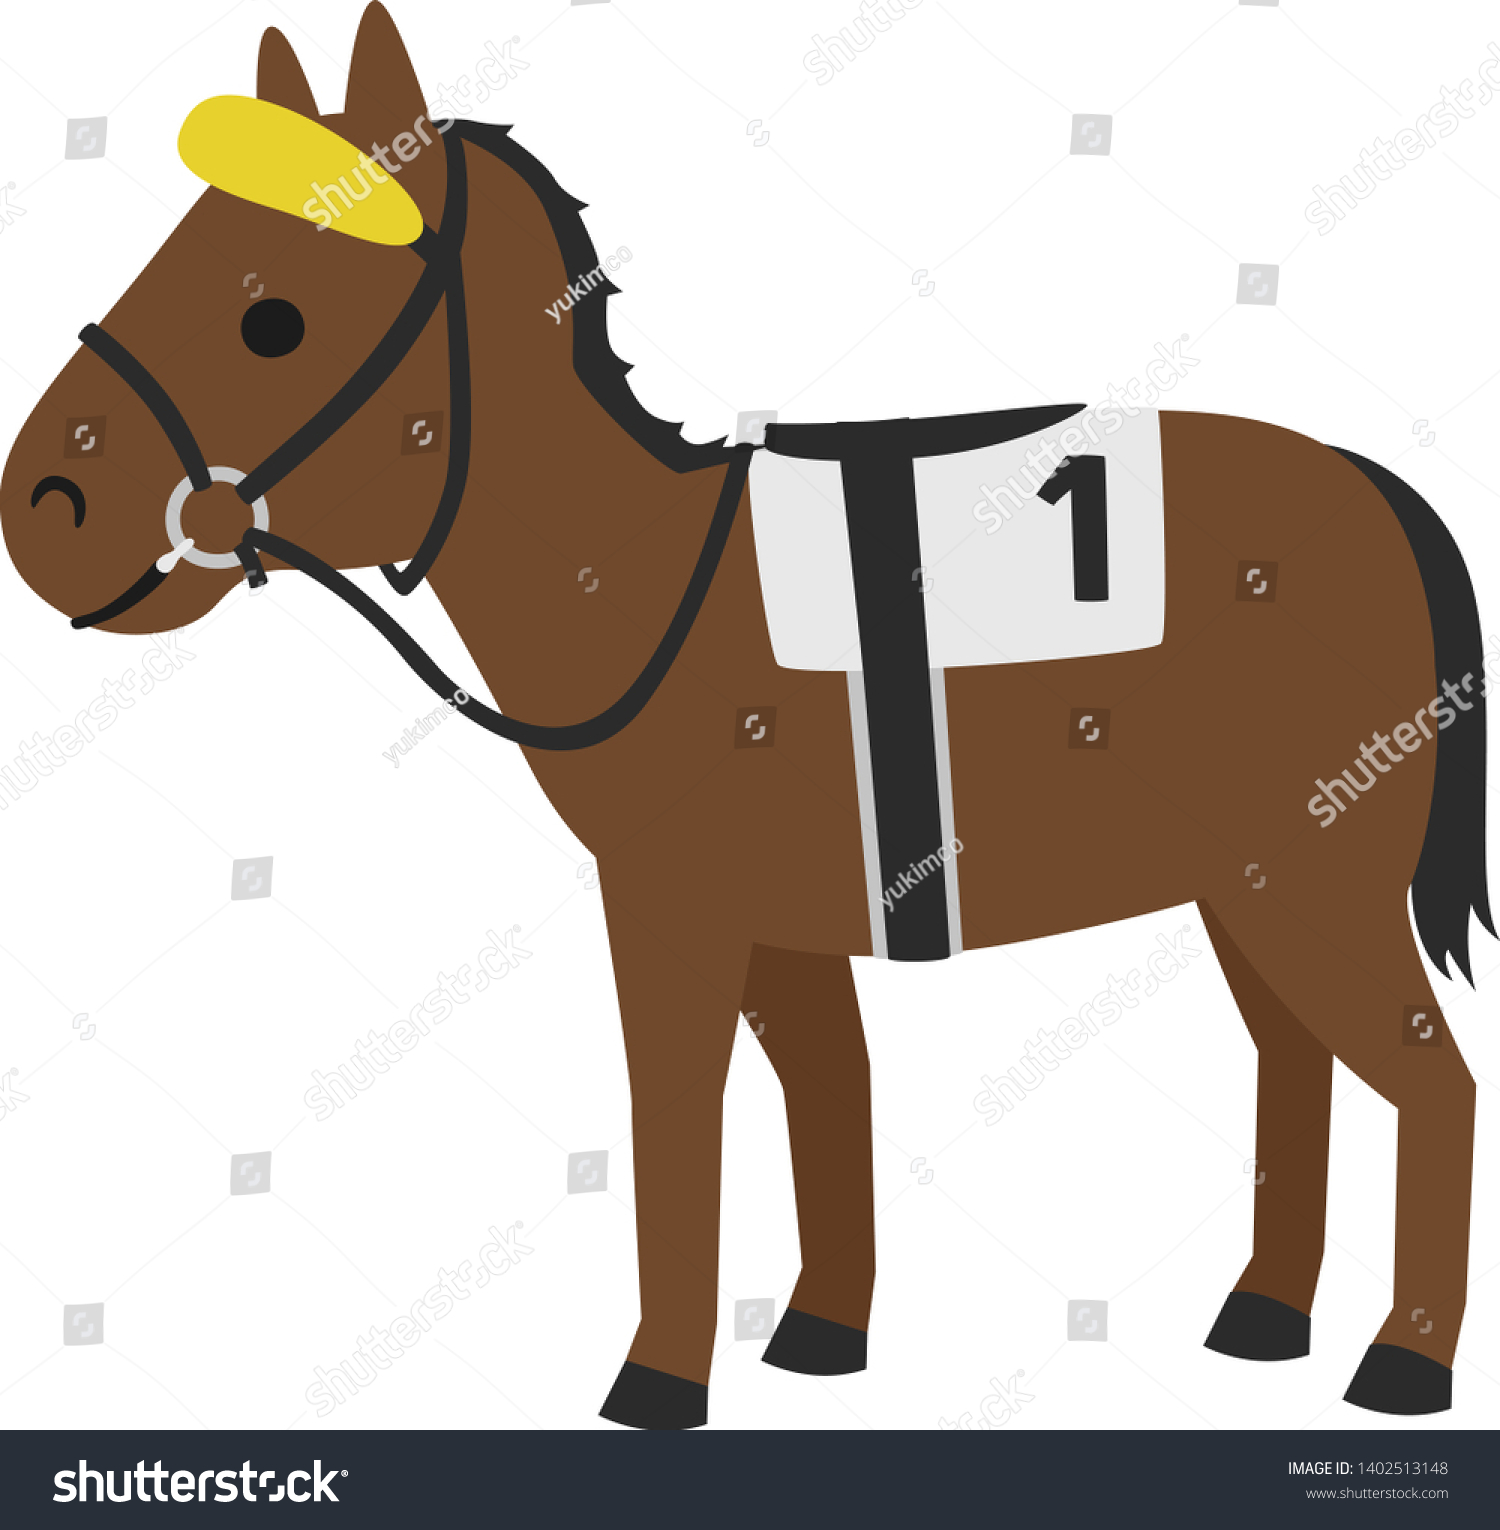 SVG of Horse racing illustration. This is a racehorse with a horse gear. A browband is a harness that blocks the upper view. svg